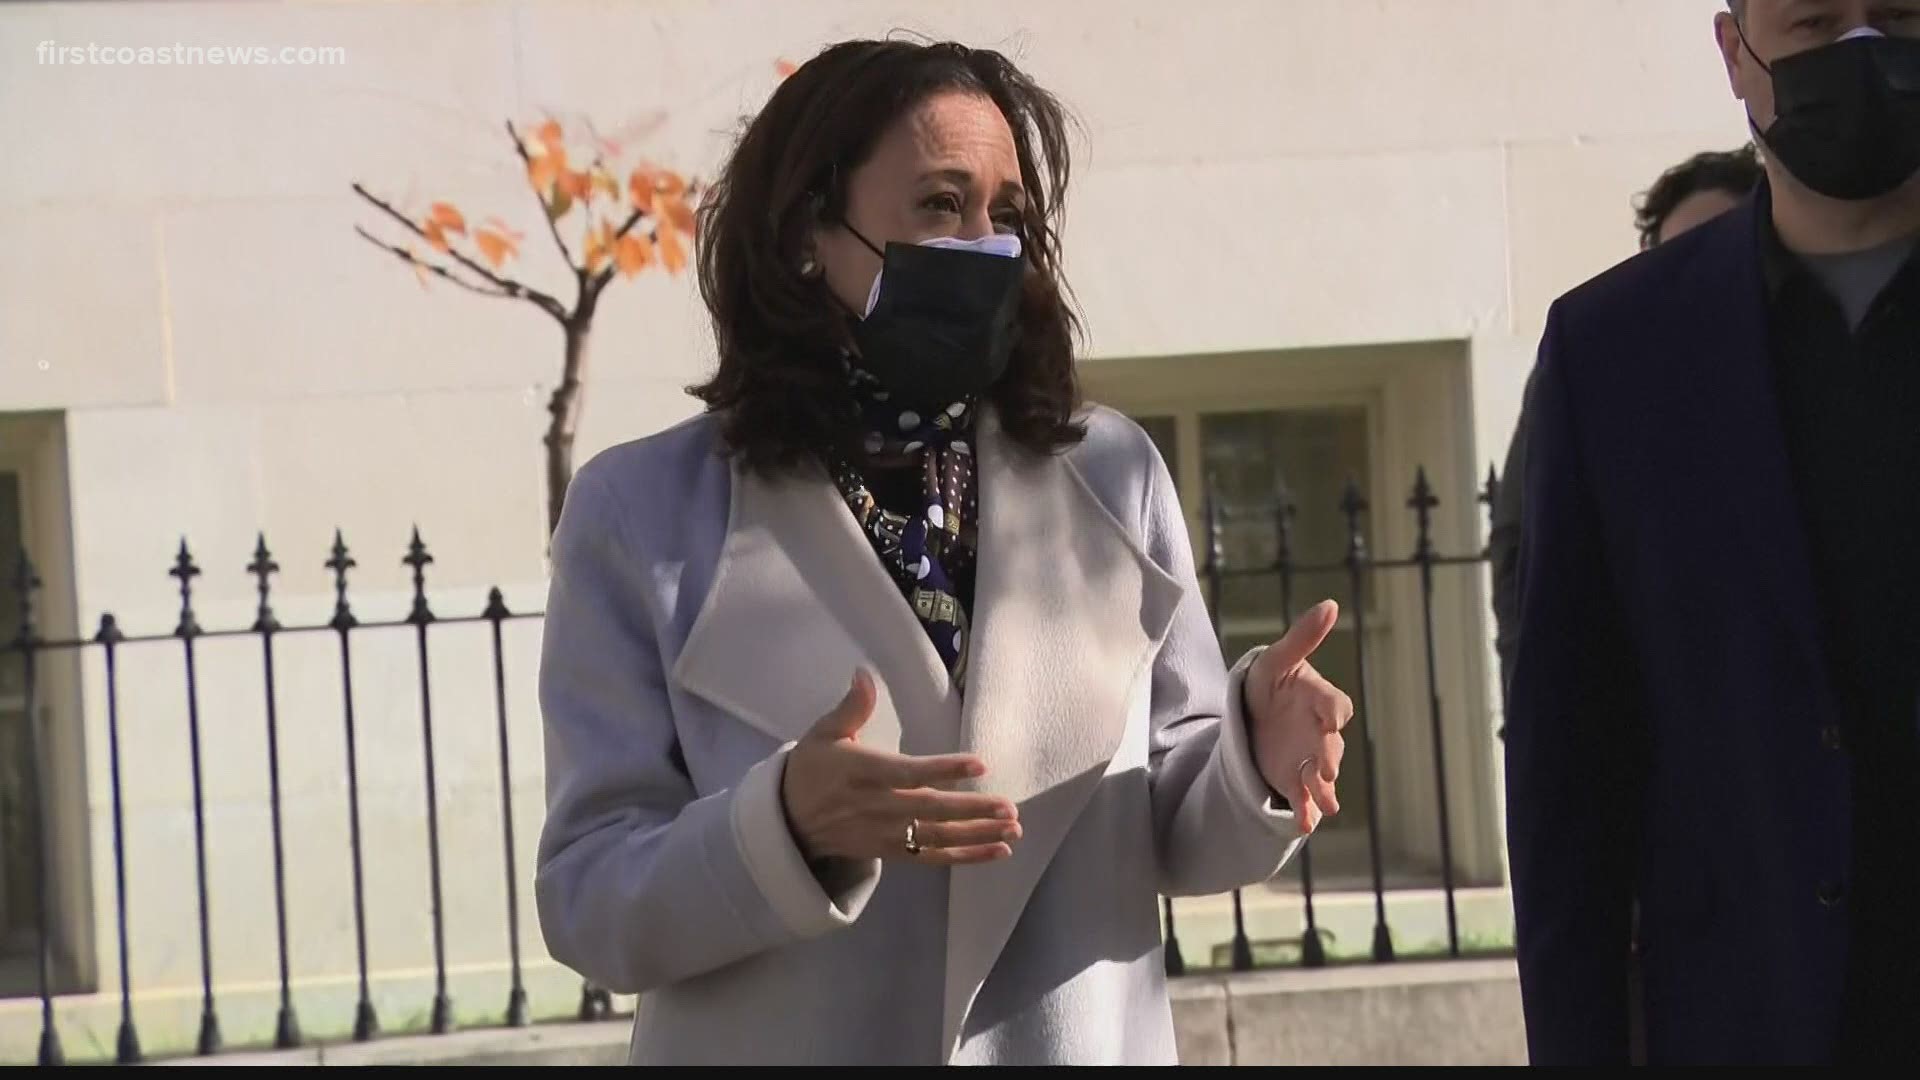 Vice President Kamala Harris is scheduled to arrive in Jacksonville around 2 p.m.